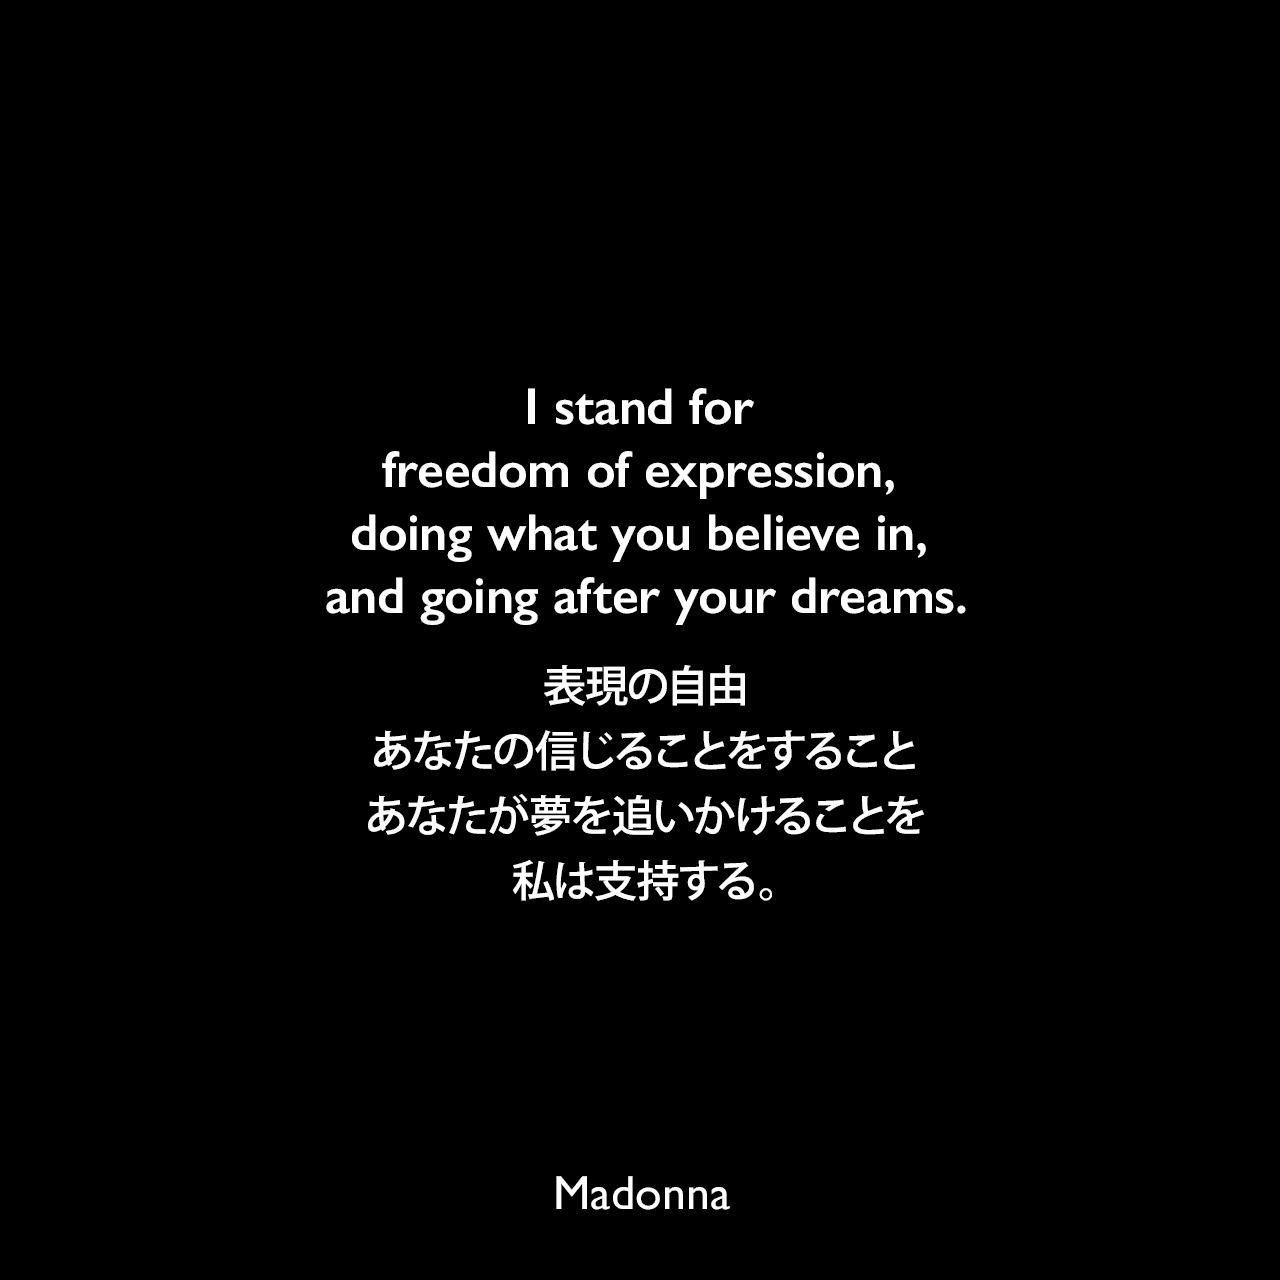 I stand for freedom of expression, doing what you believe in, and going after your dreams.表現の自由、あなたの信じることをすること、あなたが夢を追いかけることを私は支持する。Madonna